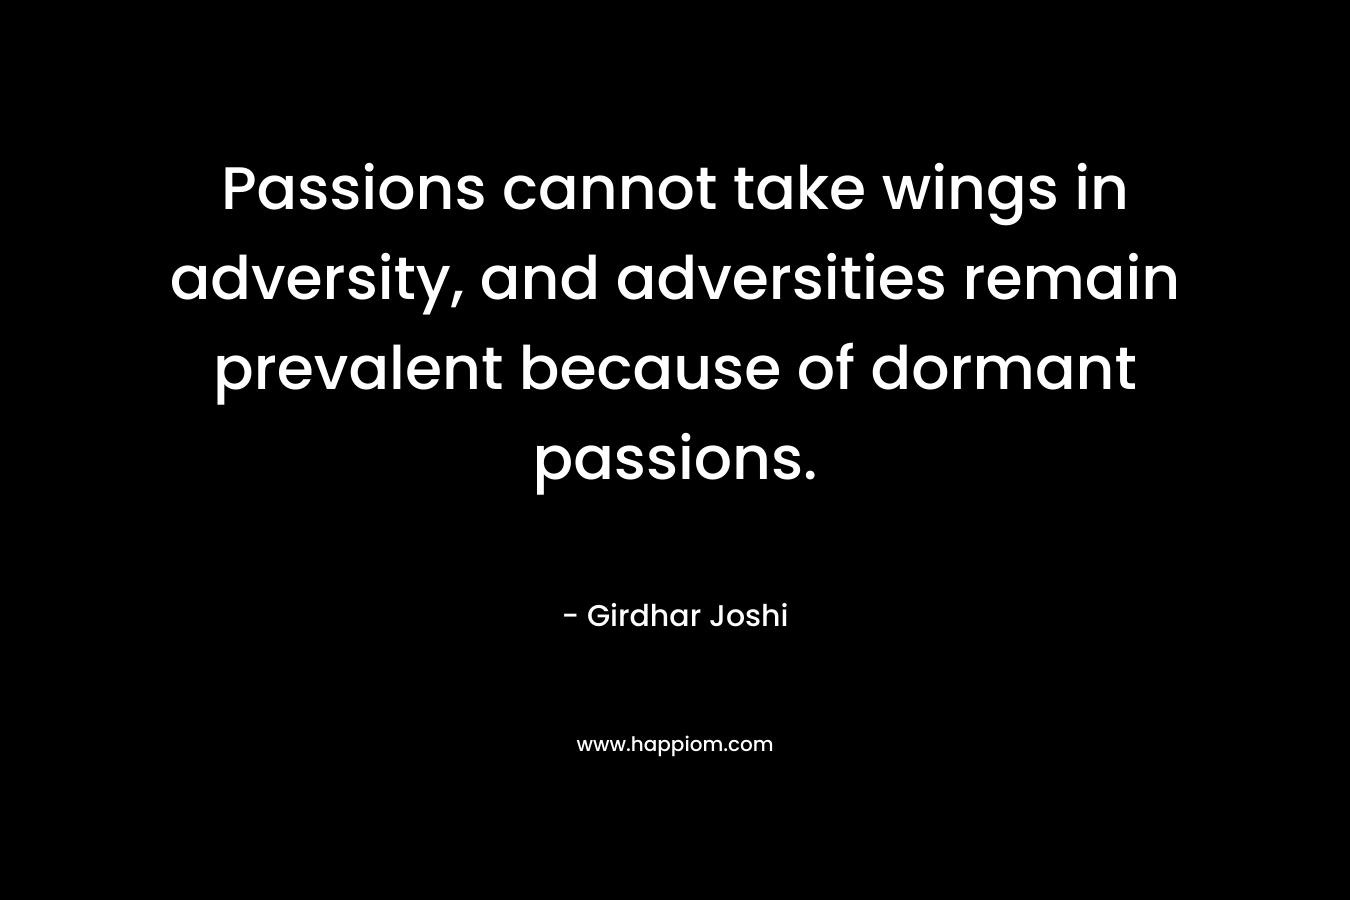 Passions cannot take wings in adversity, and adversities remain prevalent because of dormant passions.